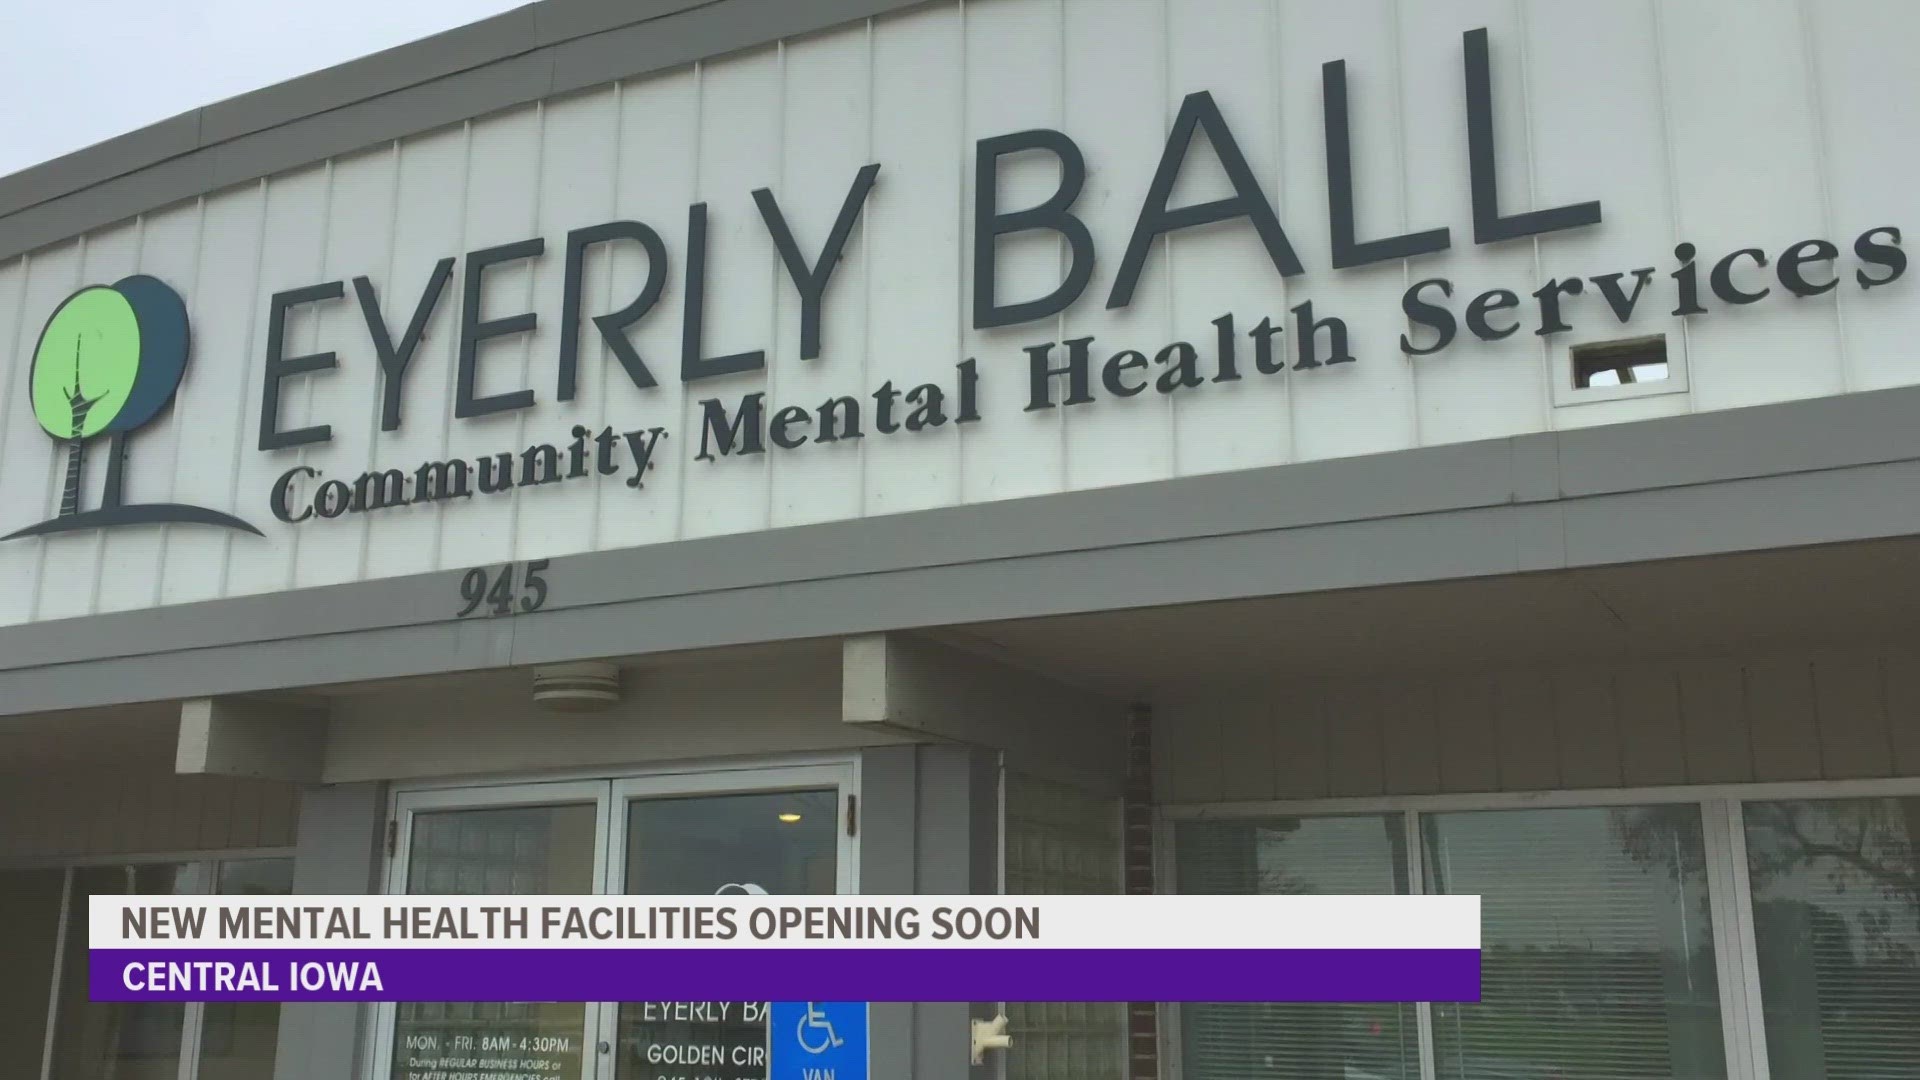 Eyerly Ball will have a Des Moines facility across the street from Iowa Lutheran Hospital. It is set to open in early 2025.